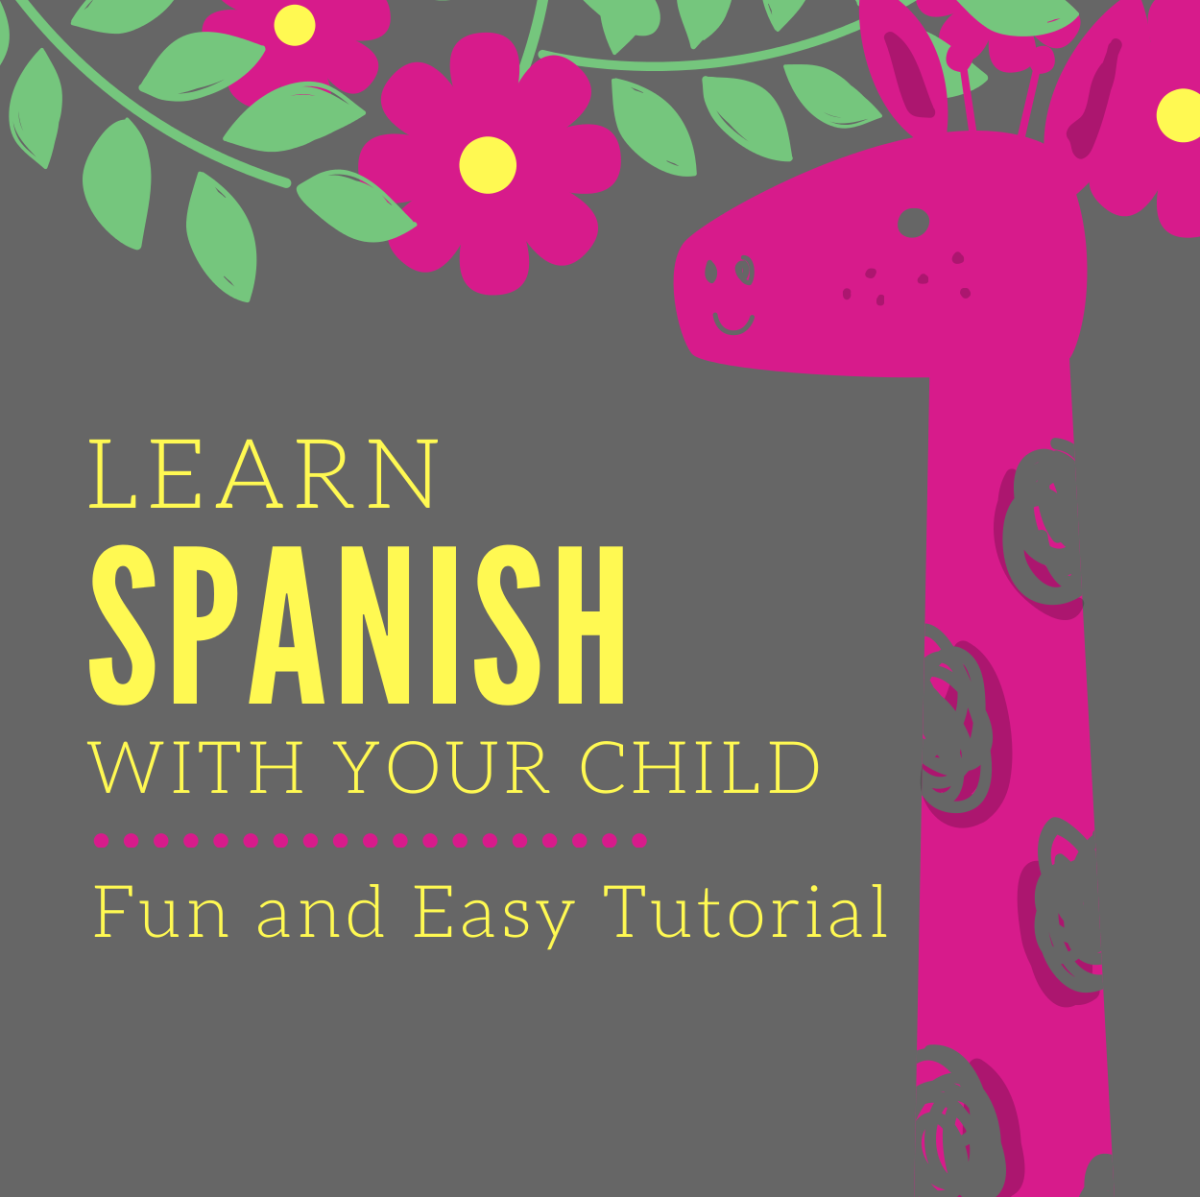 Have Fun Learning Spanish With Your Child - Learn Songs About Weather, Alphabet, Numbers and More